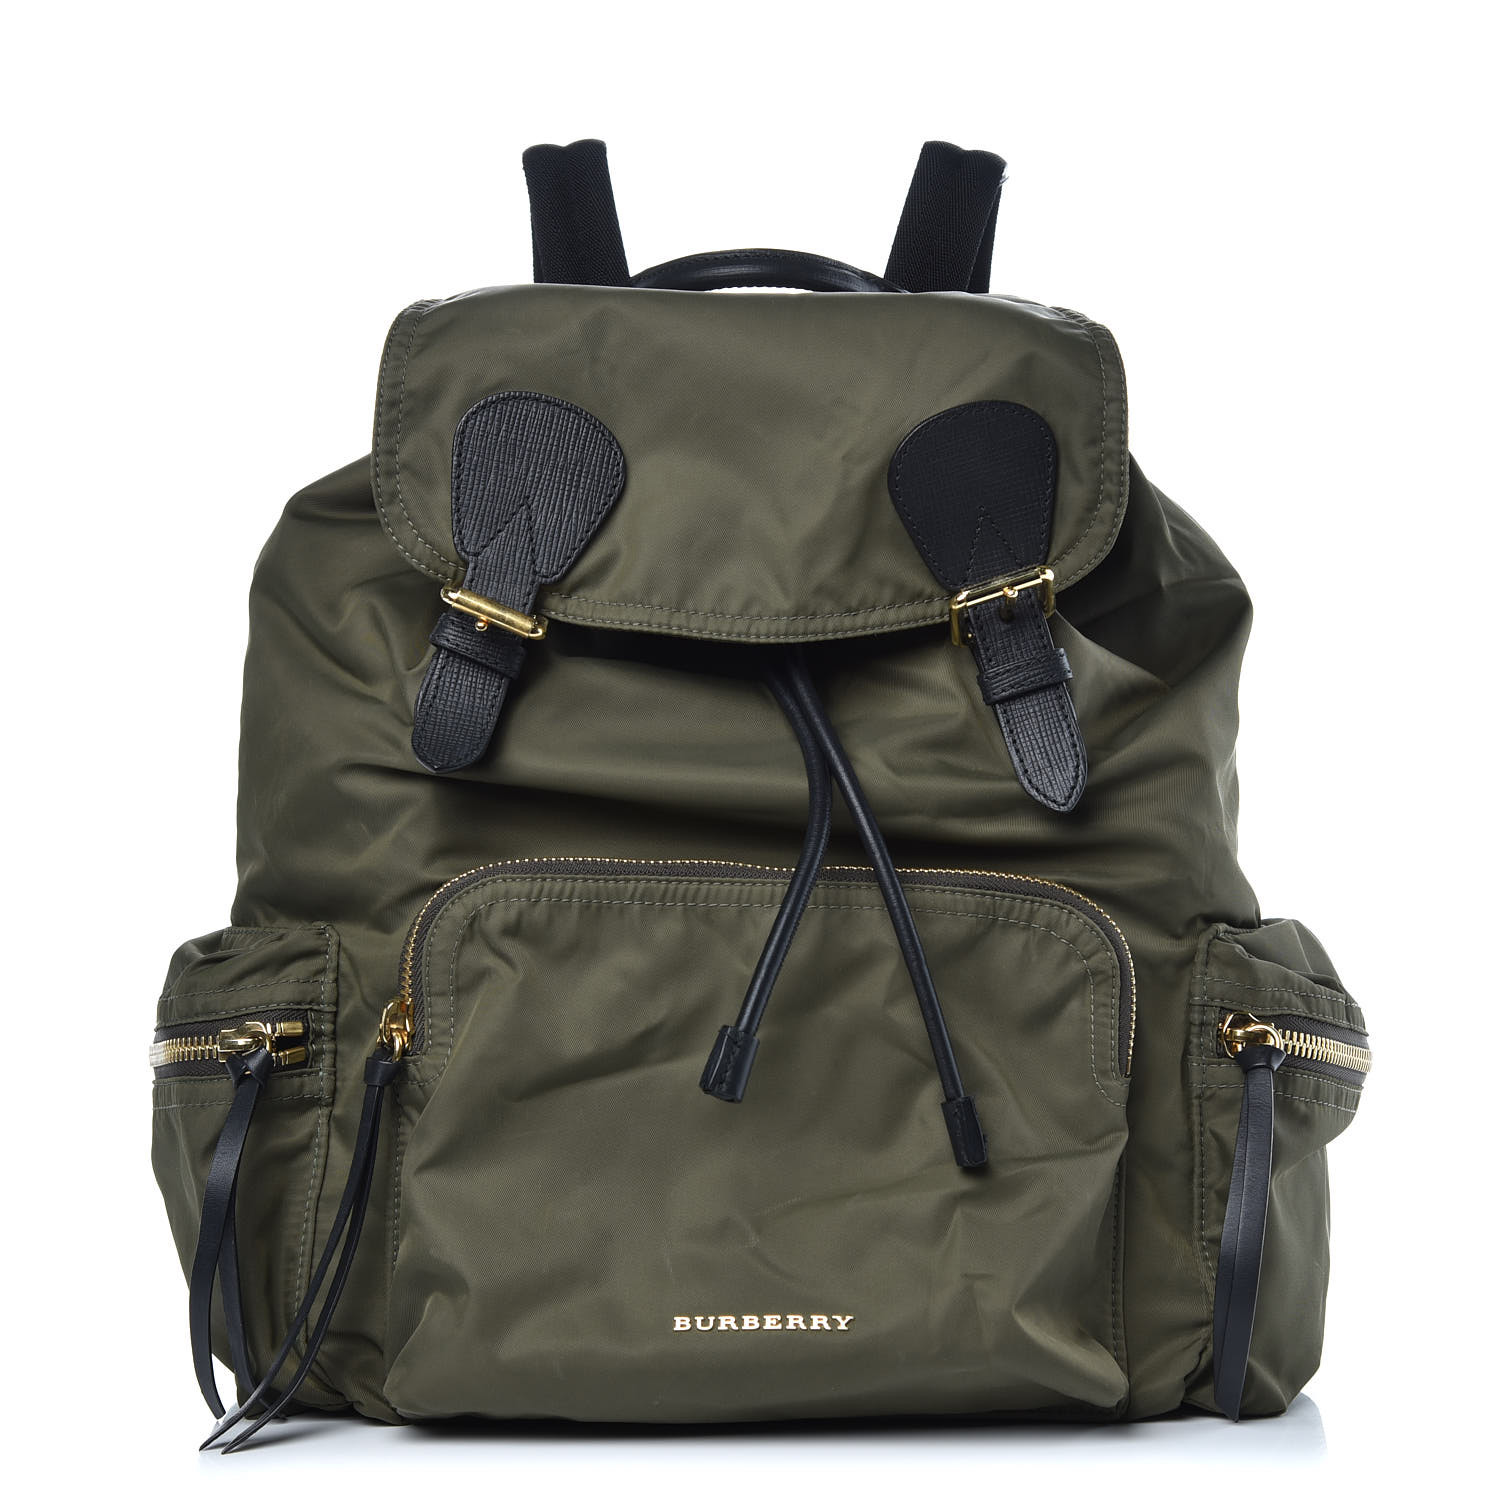 burberry large backpack